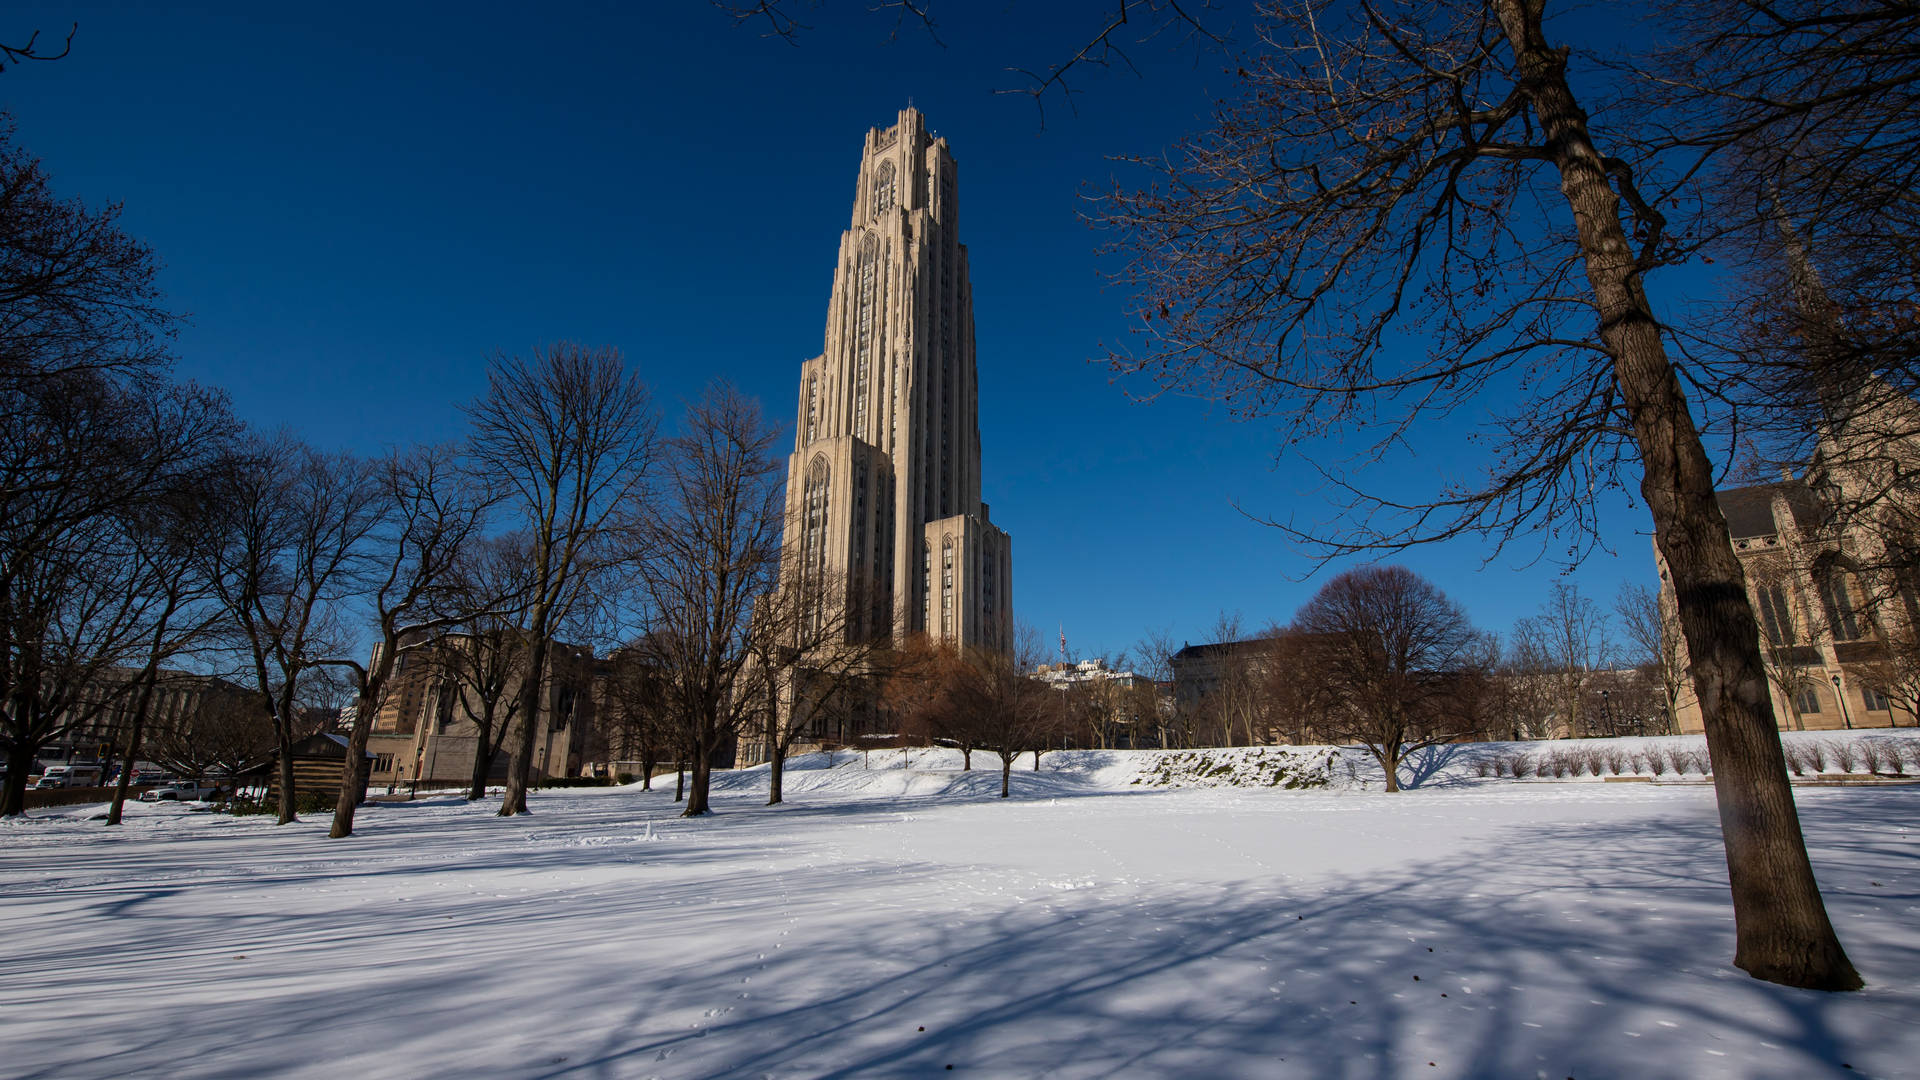 University Of Pittsburgh Snow-Covered Ground Wallpaper